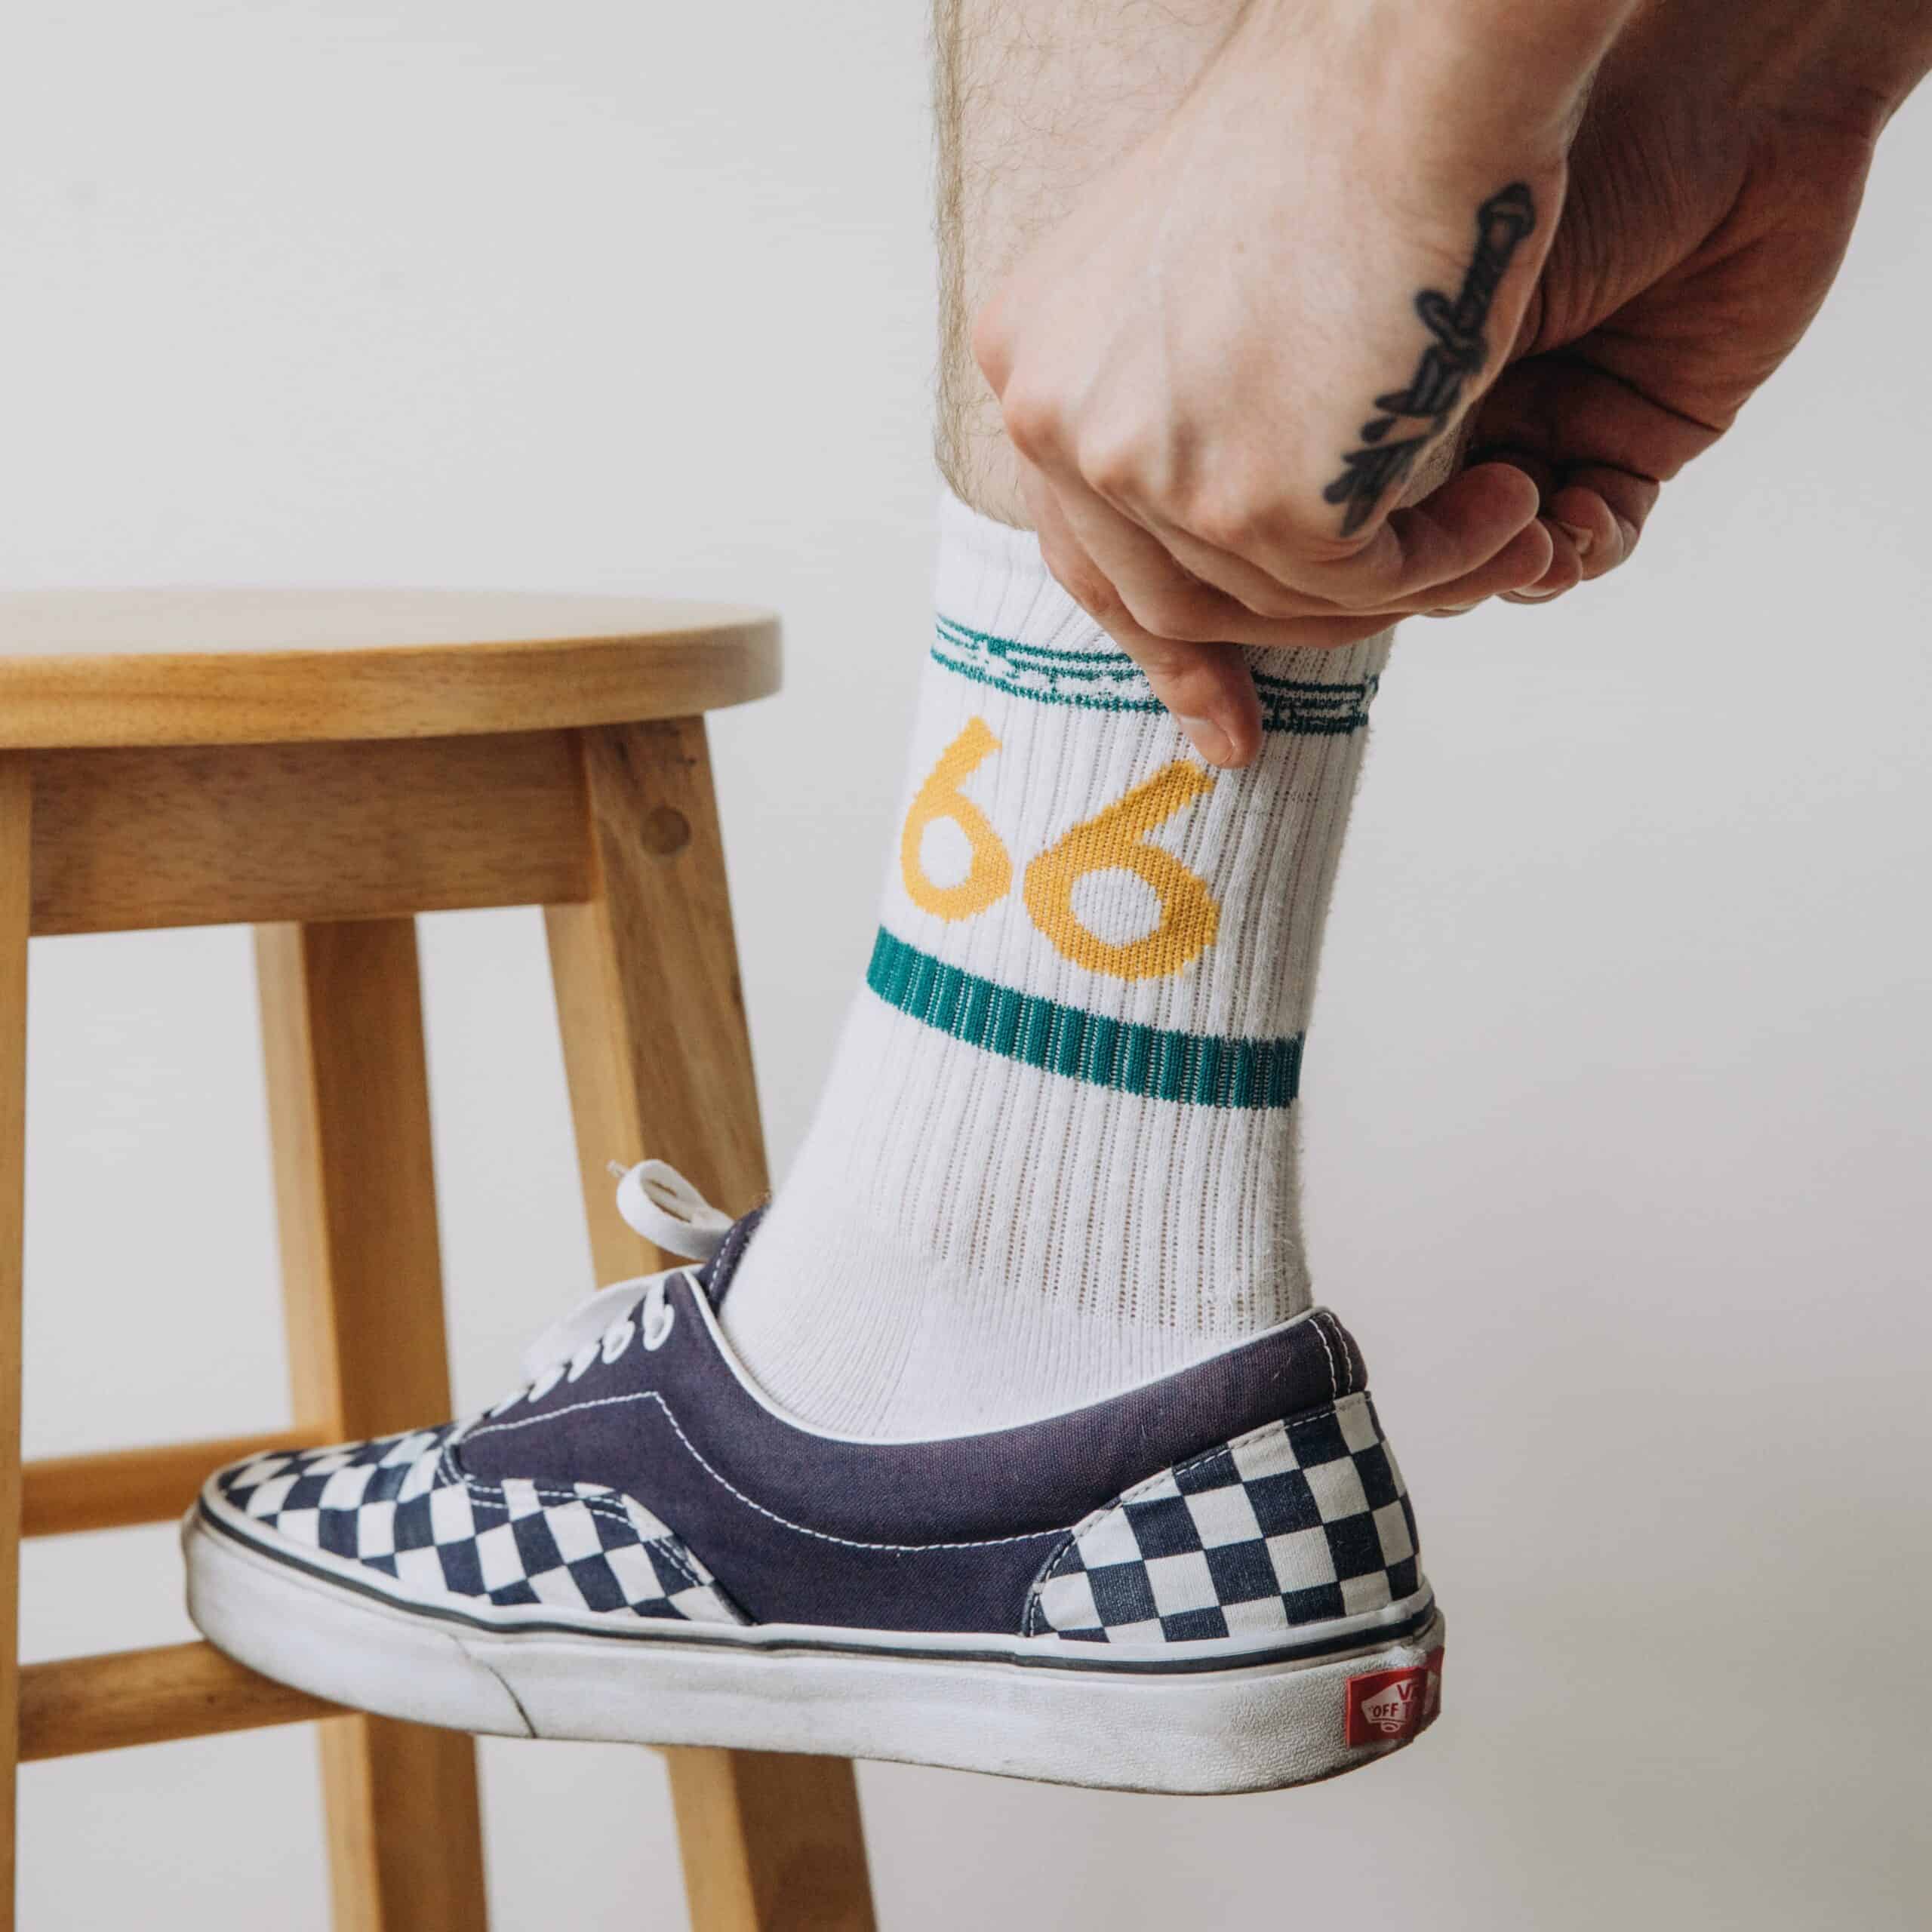 What Socks To Wear With Vans? 7 Amazing Ideas